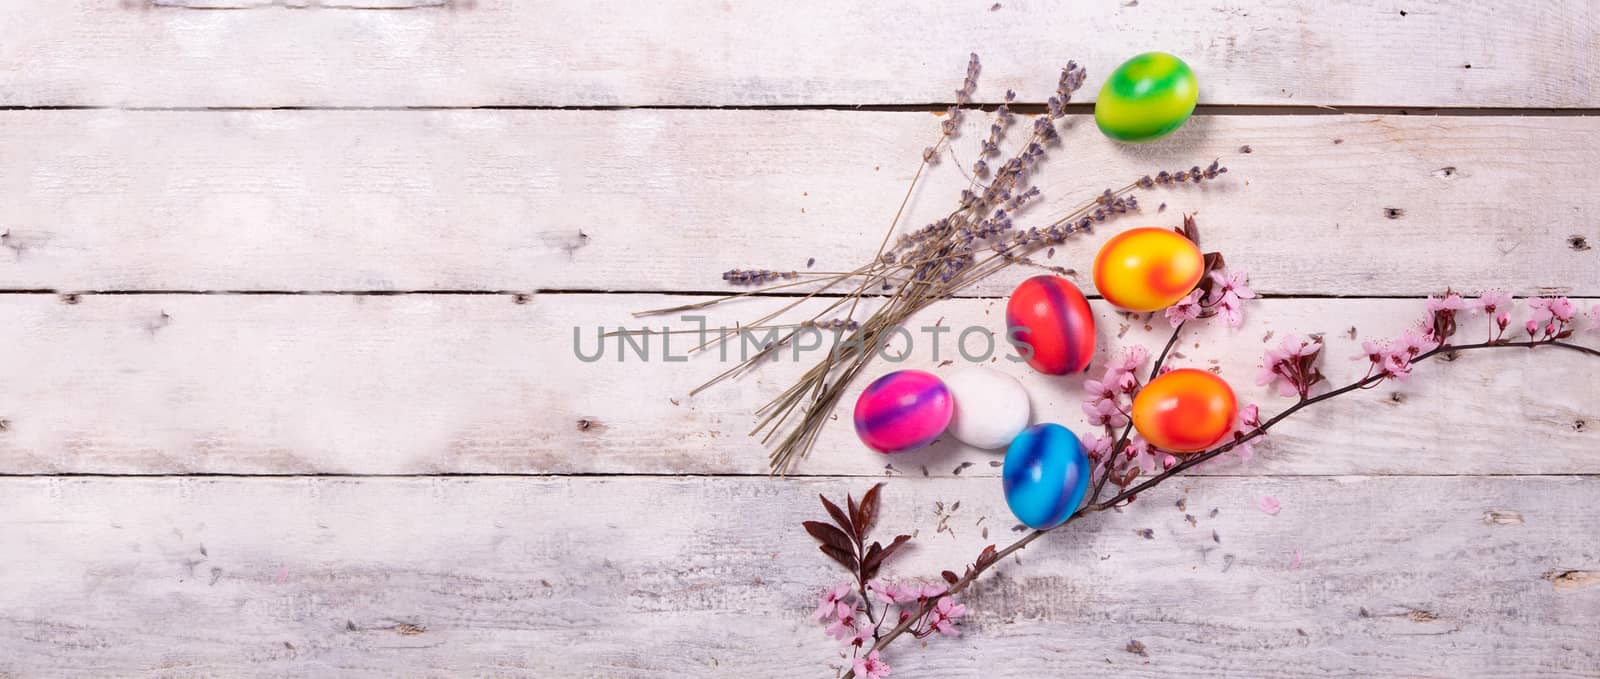 colored easter egg on wood background by PeterHofstetter